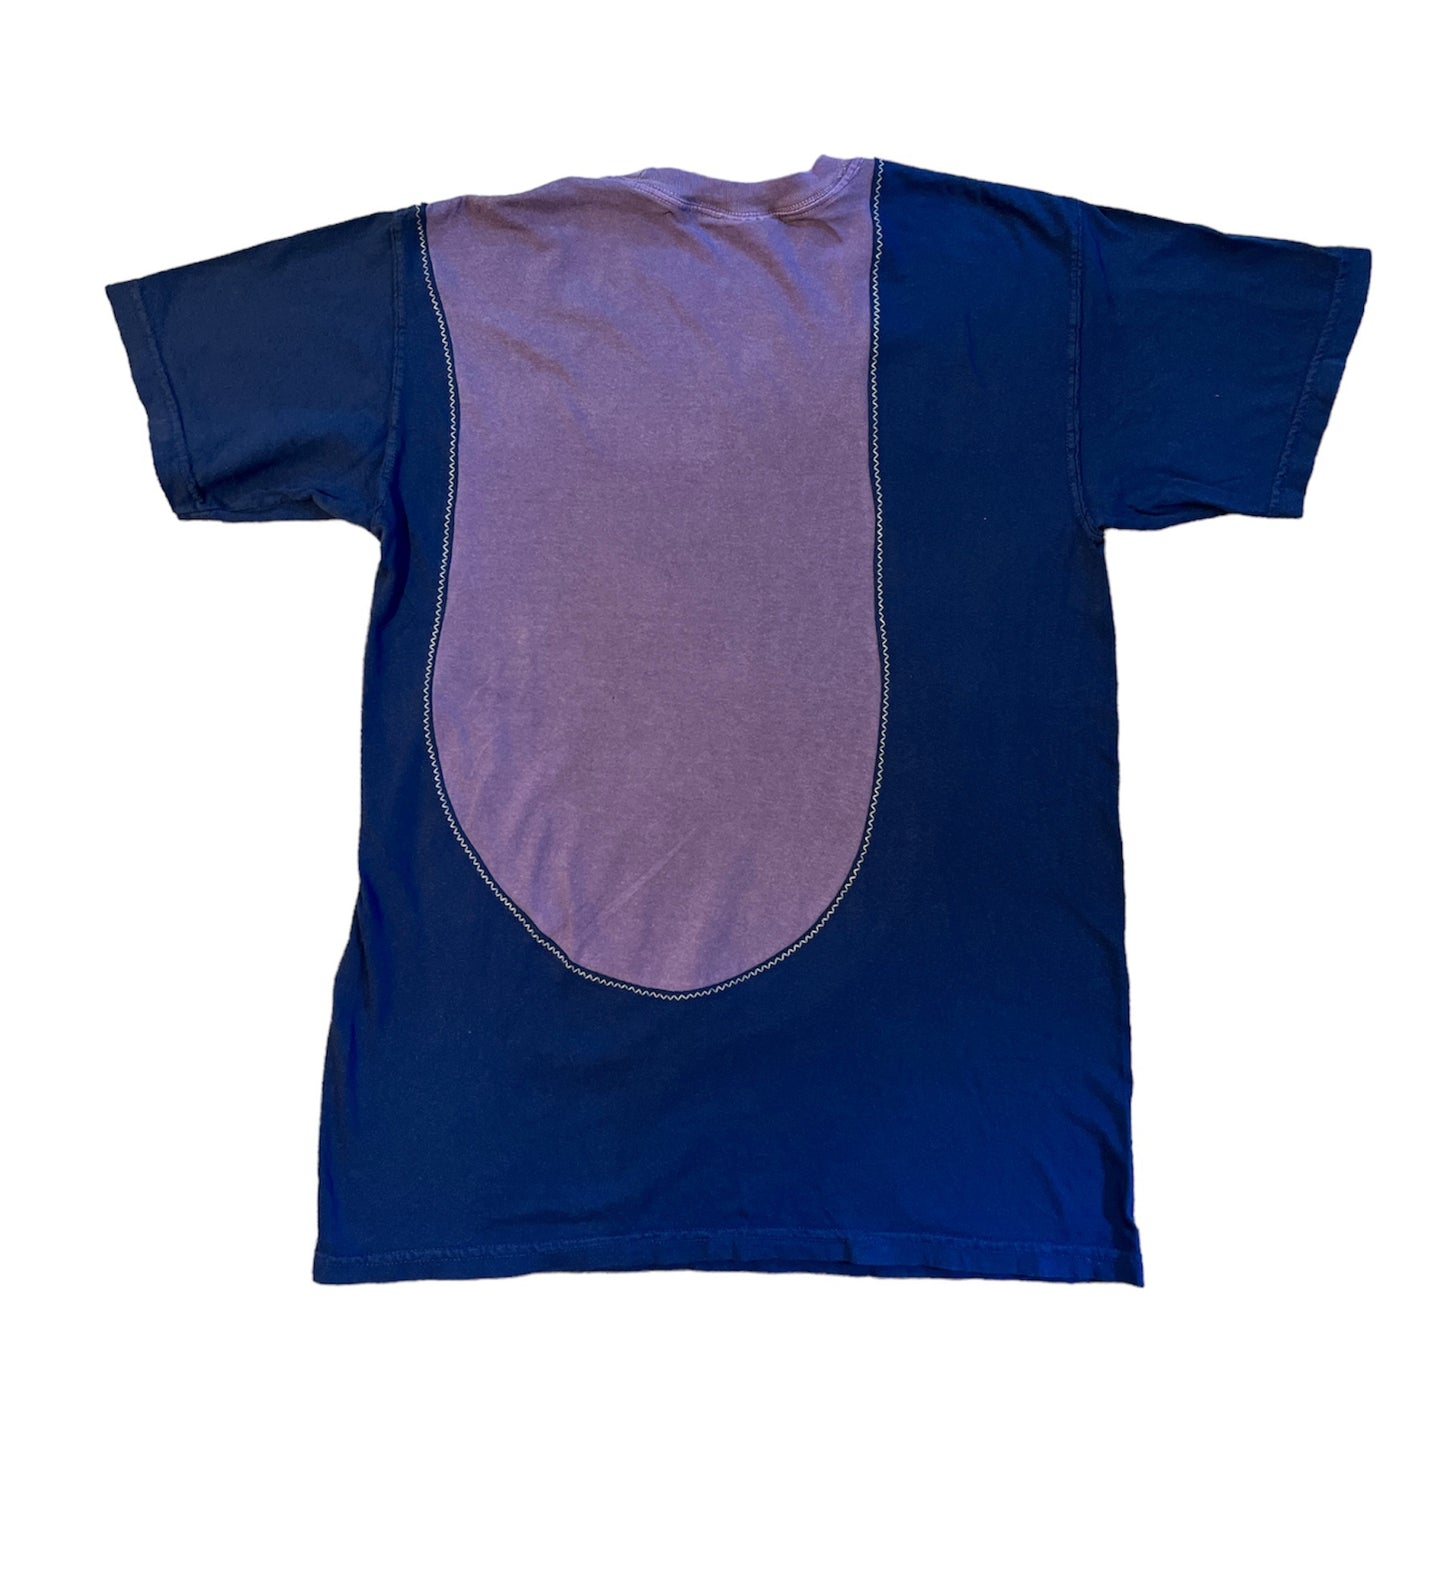 This Dark blue and purple 2-tone shirt is a perfect sustainable alternative to your average t-shirt. Picture yourself in this incredibly cool tee that will make you stand out in a crowd. The unique design of this tee combines two amazing colors to create a visually striking and stylish look. With its eye-catching color combination, this tee is perfect for those who want to make a bold fashion statement.